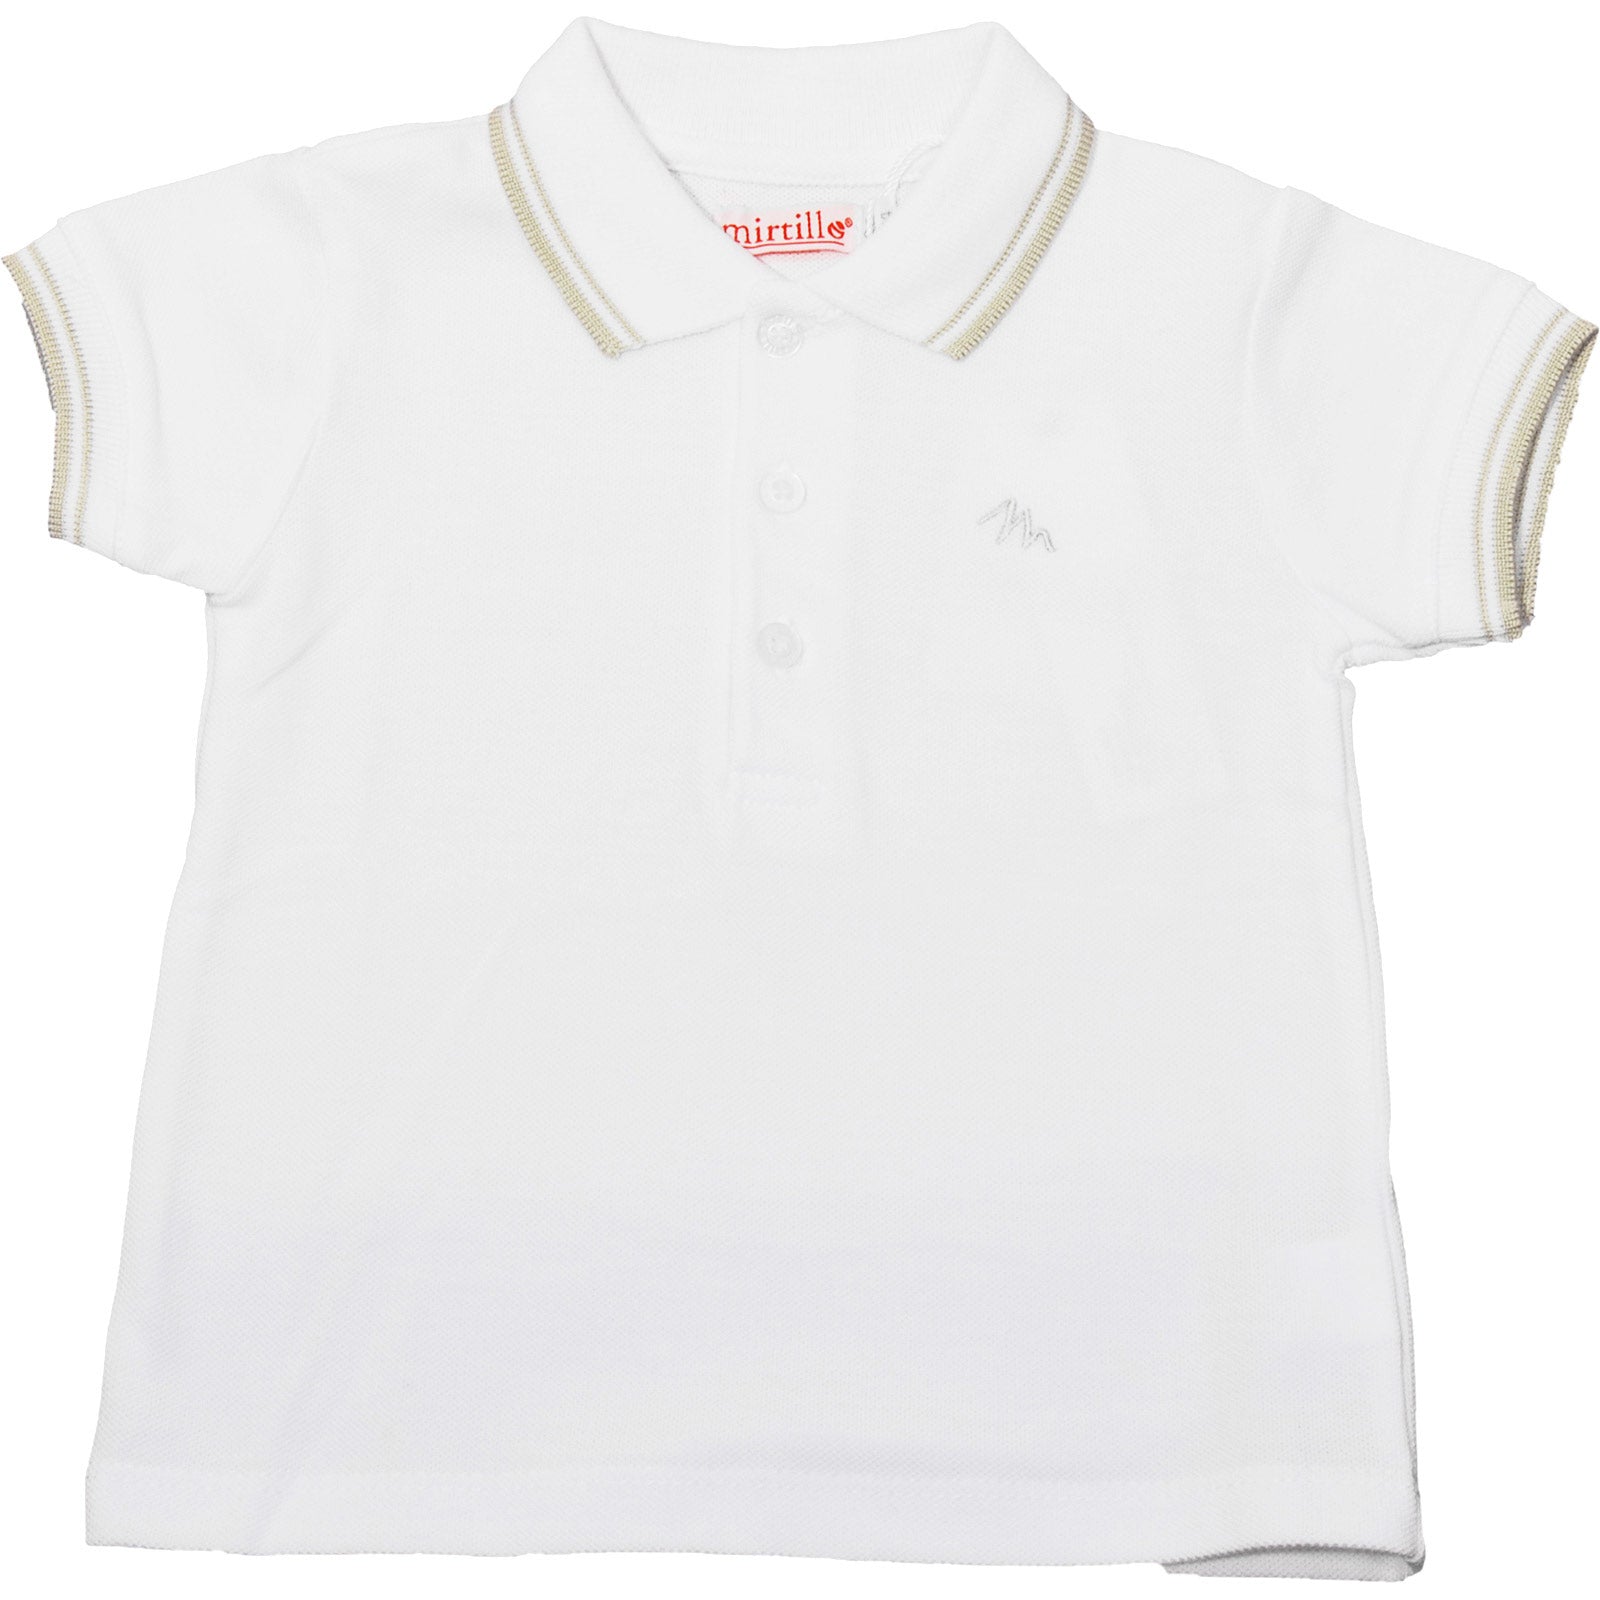 
  Cotton piquet polo shirt from the children's clothing line Blueberry, short sleeve, white with...